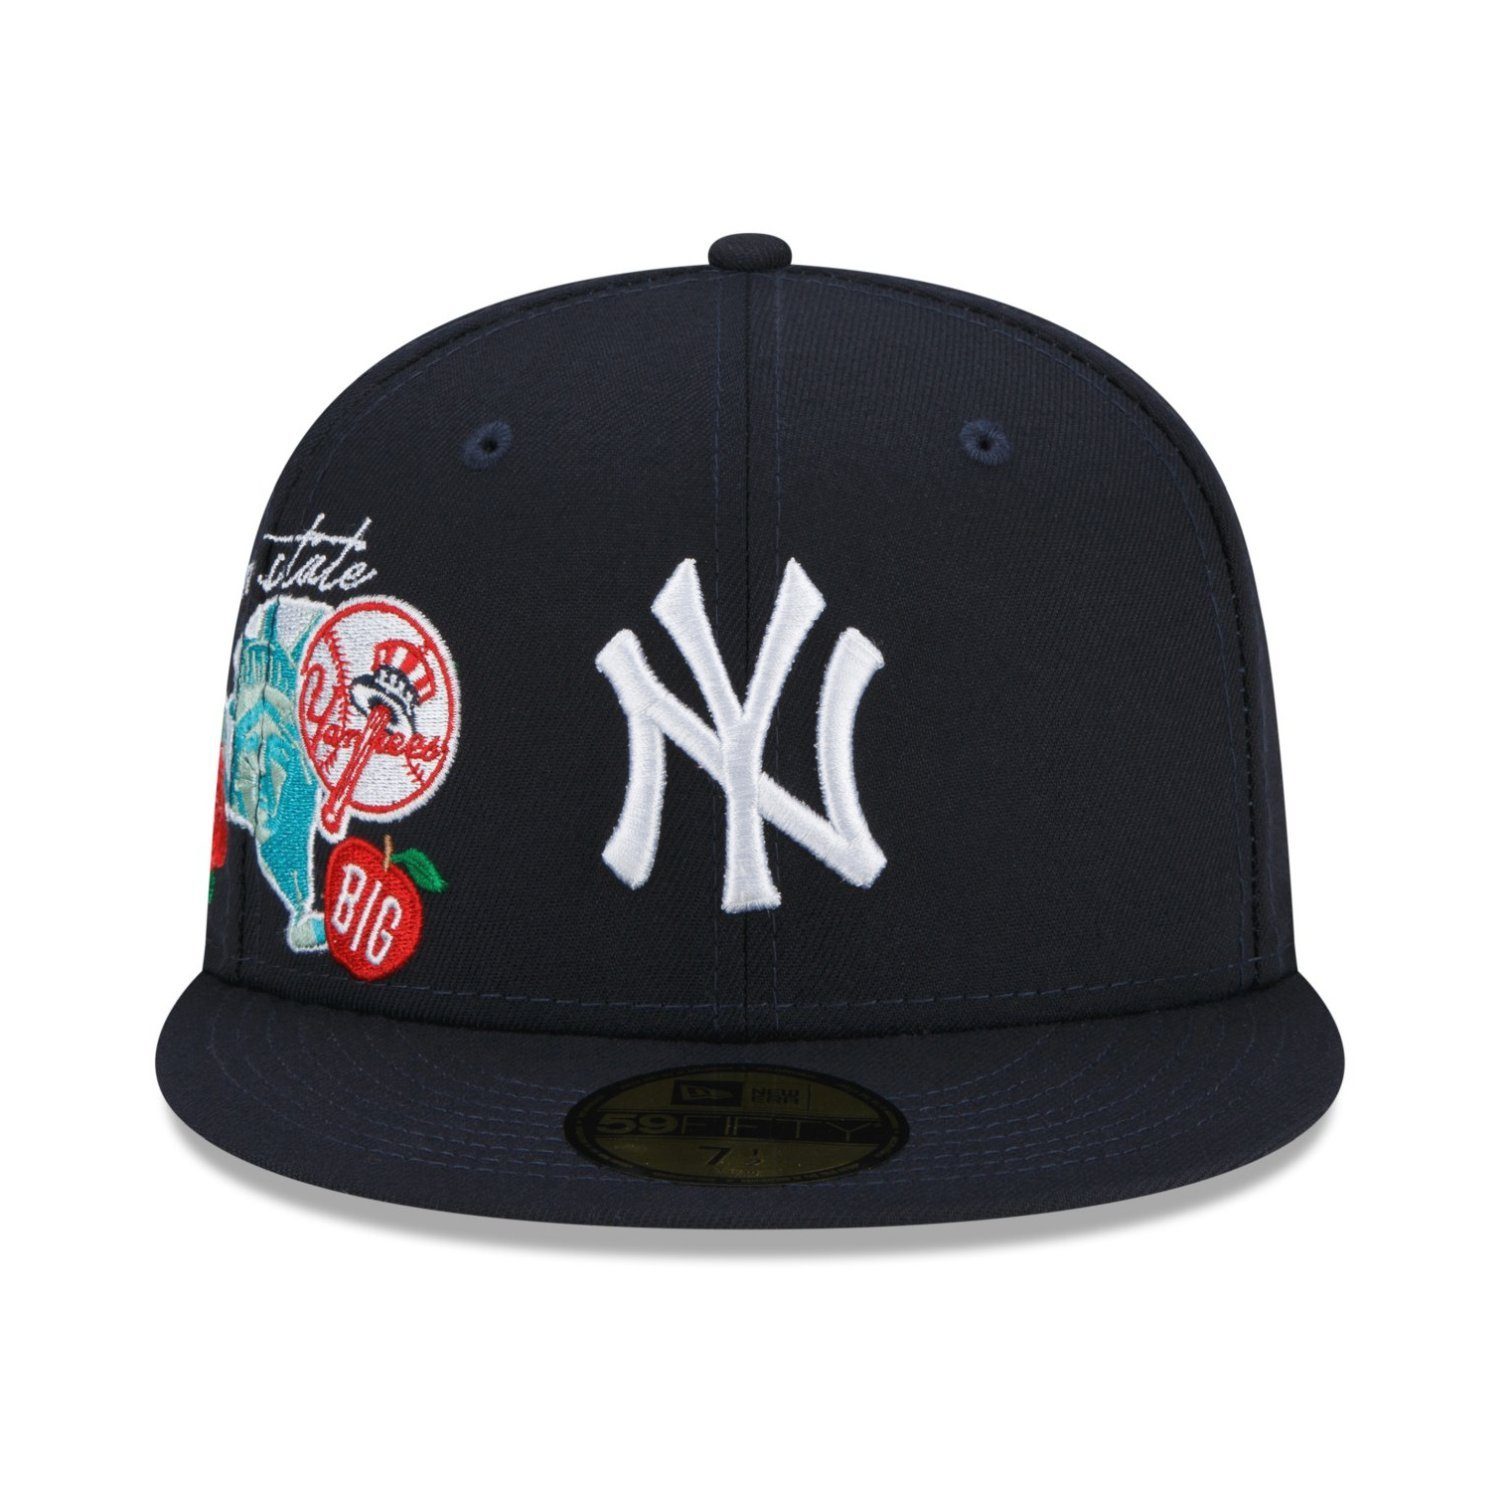 York CITY New CLUSTER Yankees 59Fifty New Fitted Cap Era